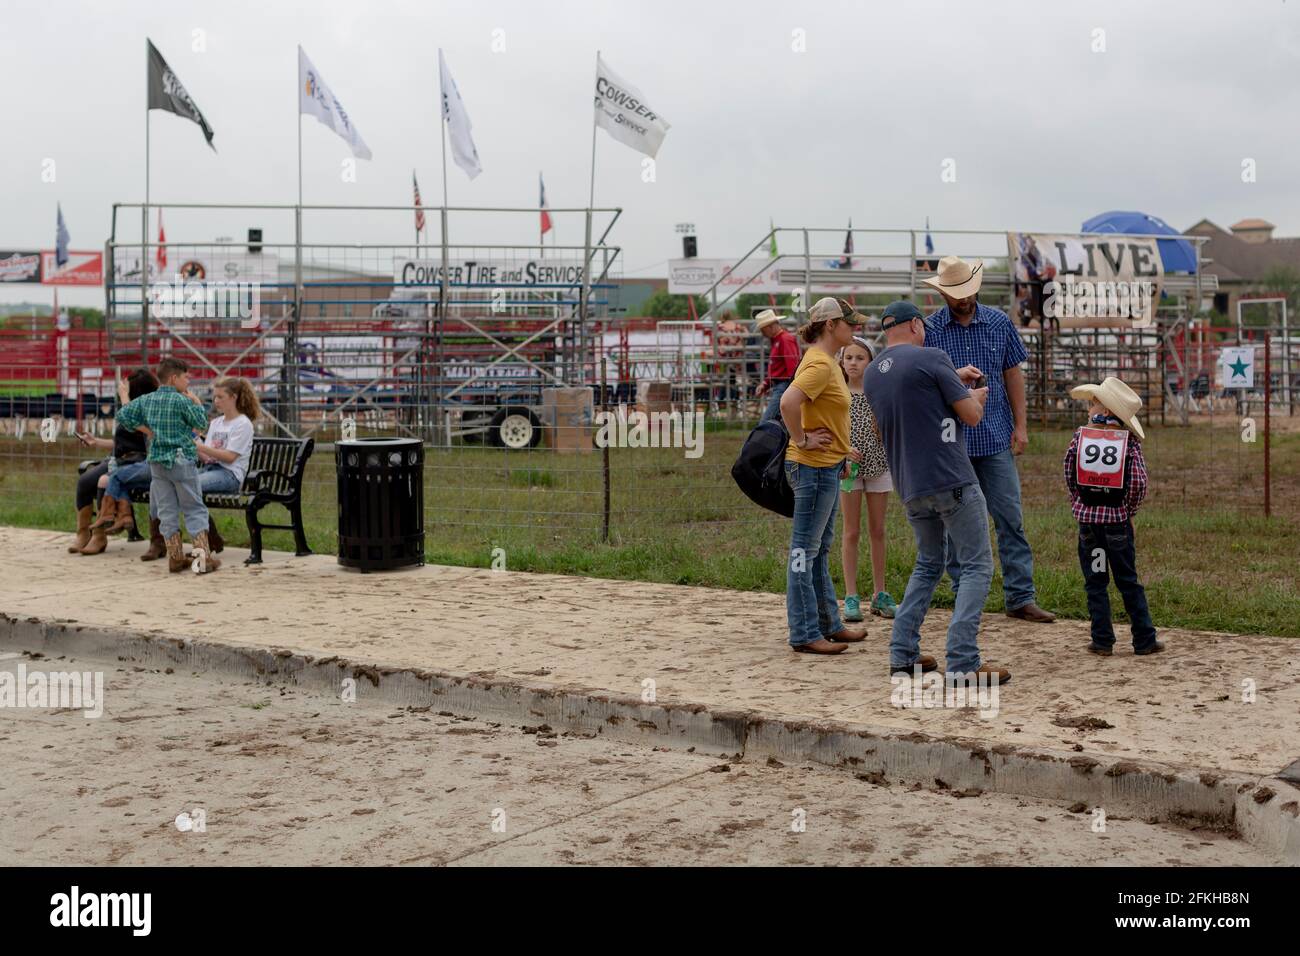 Roanoke, Texas, USA. 1st May, 2021. 5/1/21 Roanoke, Texas - A rodeo pin stands empty after a junior rodeo took place. The road and side walk is covered with mud after the rodeo ended. This is one of the first public fairs that have taken place since Texas has opened up 100% since the COVID-19 pandemic hit the state. Credit: Chris Rusanowsky/ZUMA Wire/Alamy Live News Stock Photo